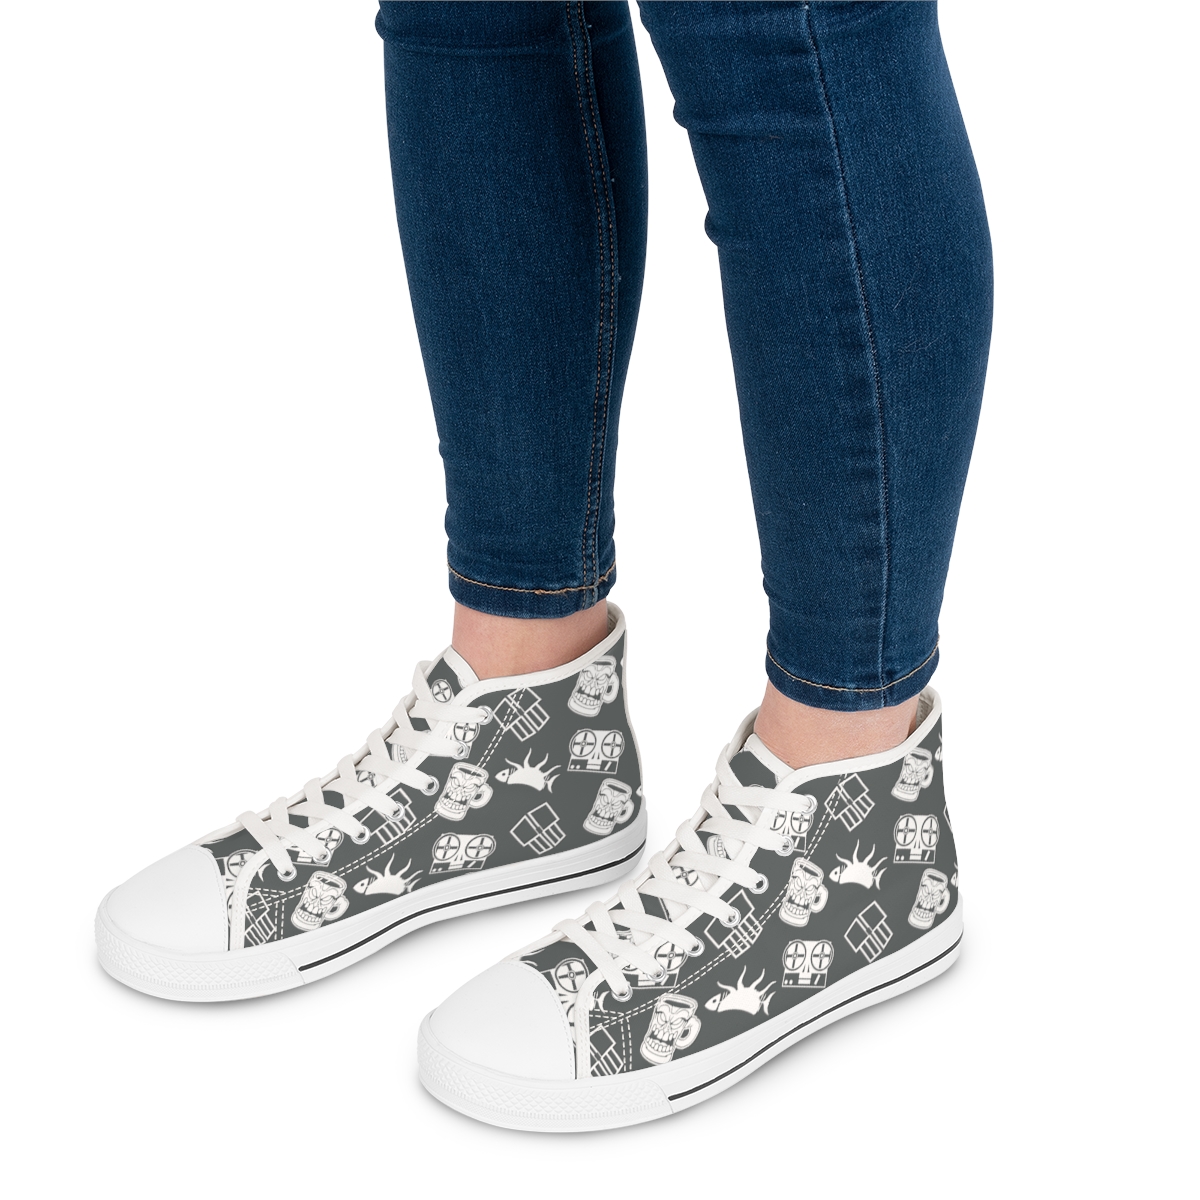 Stealthy Sneaks {Dorian Gray Women's High Top Sneakers} product thumbnail image